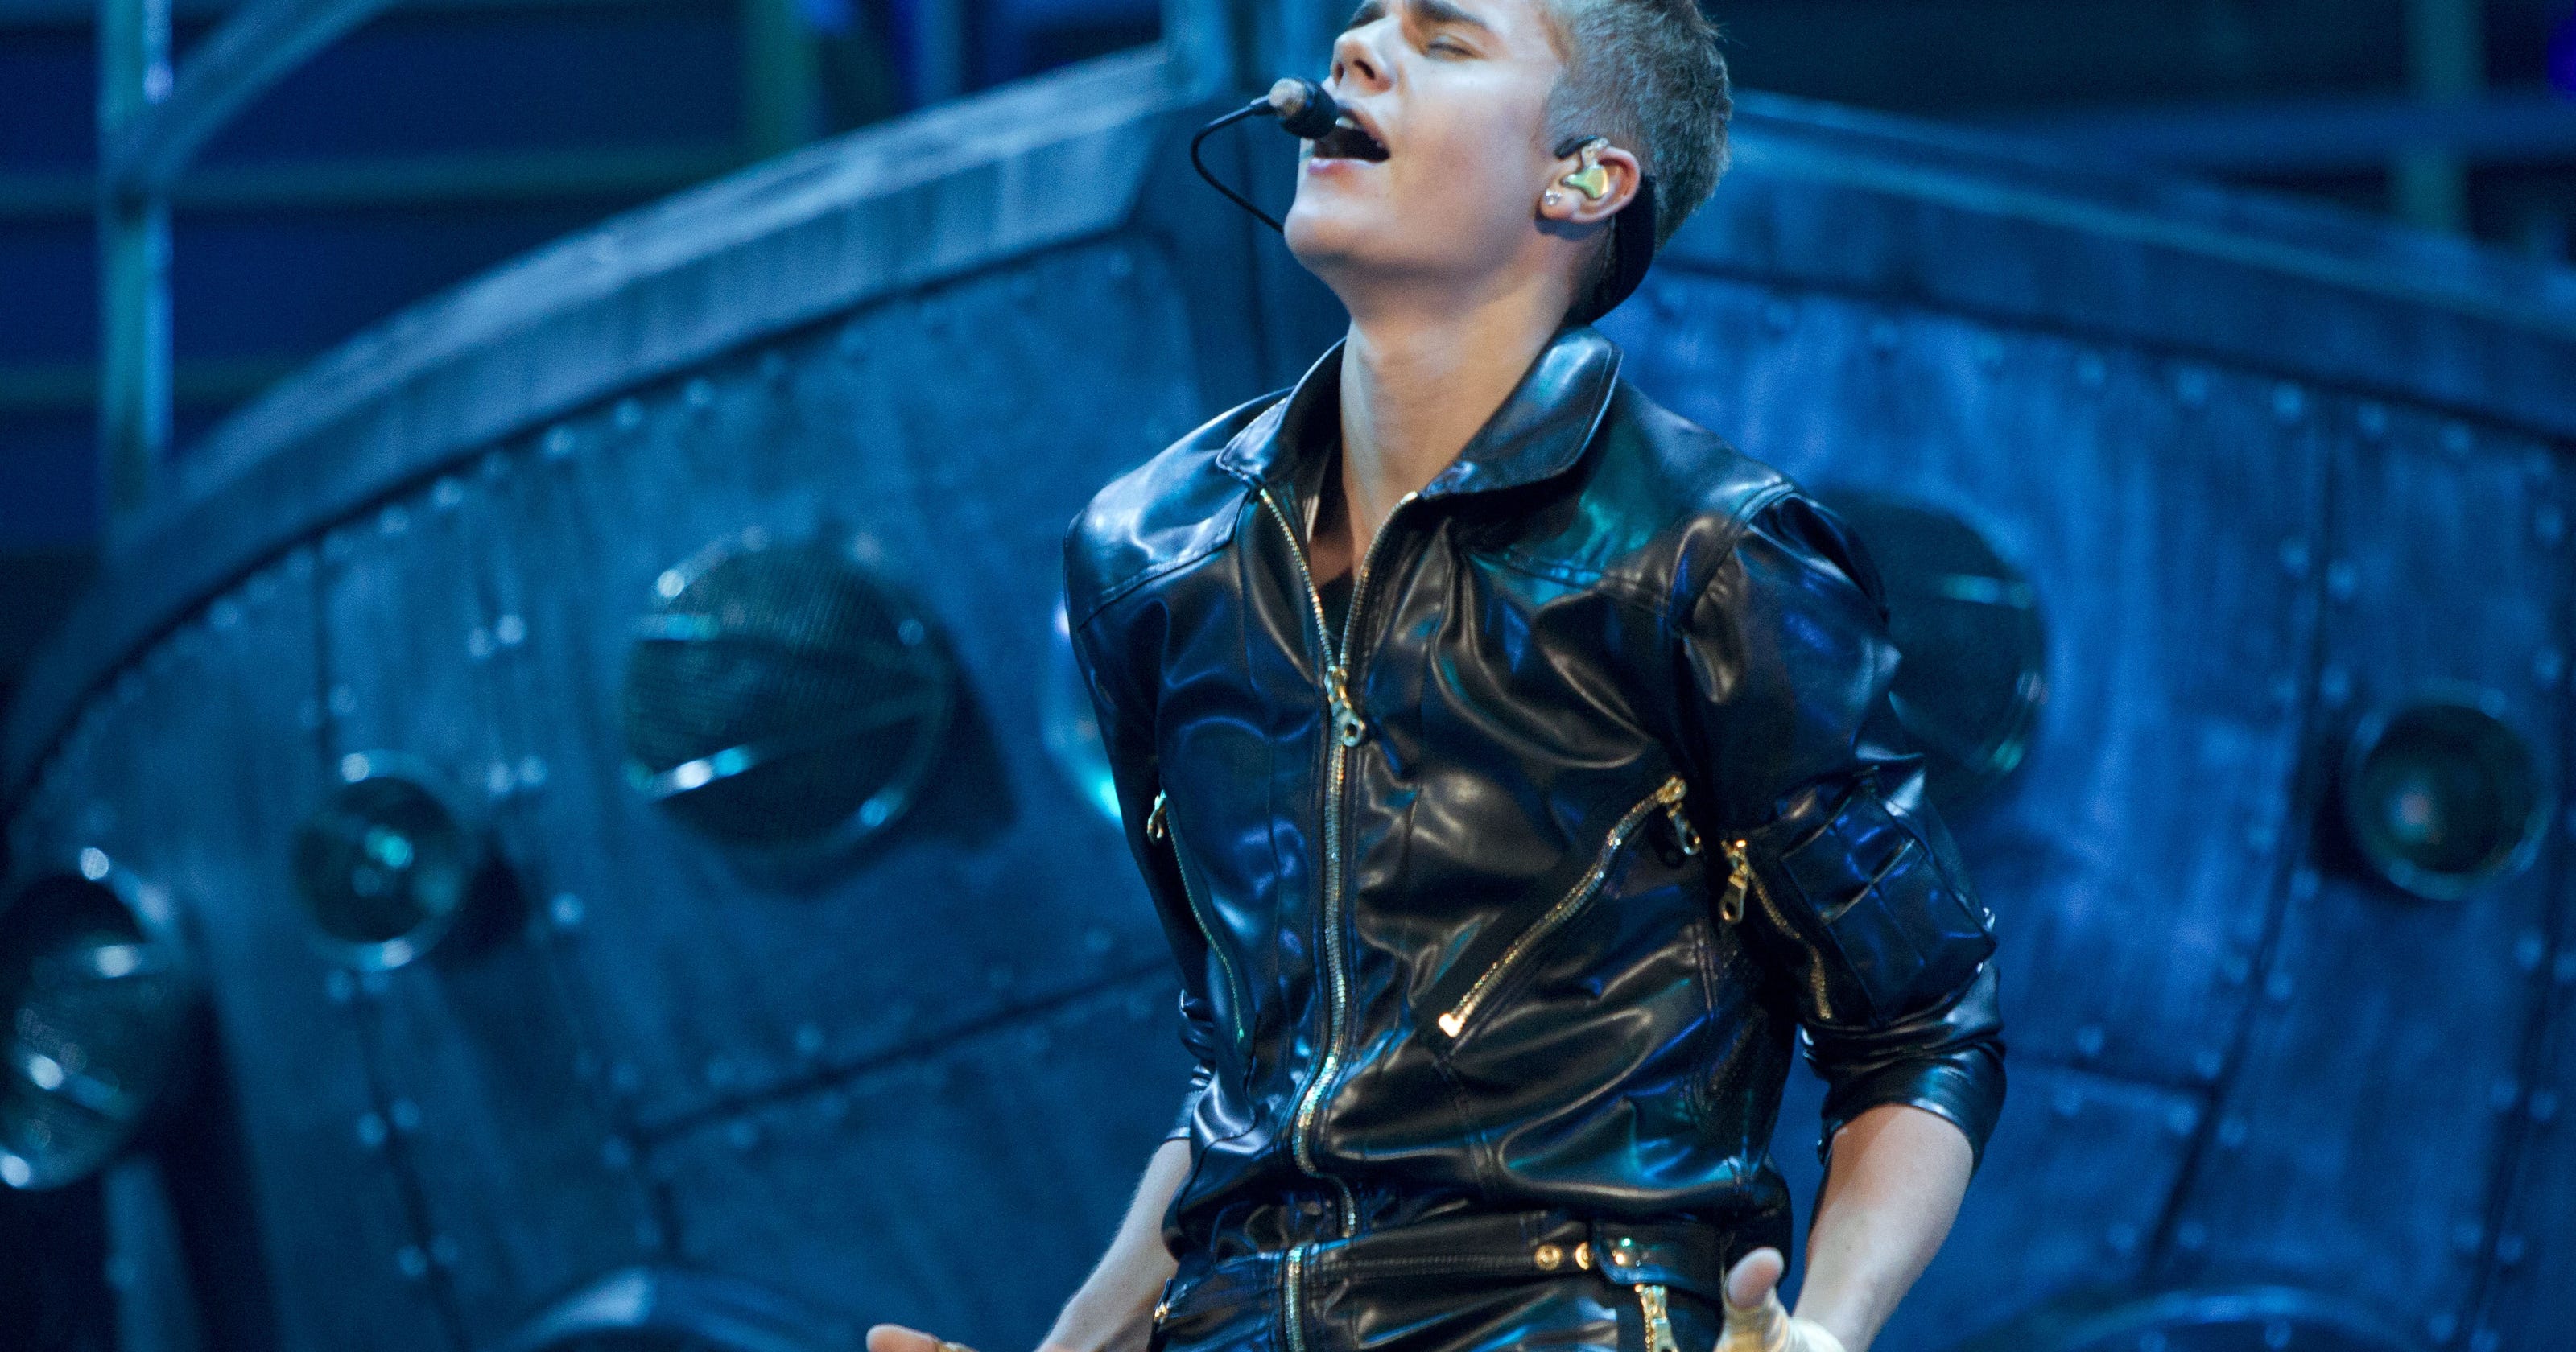 Justin Bieber: Images from 'Believe' tour3200 x 1680